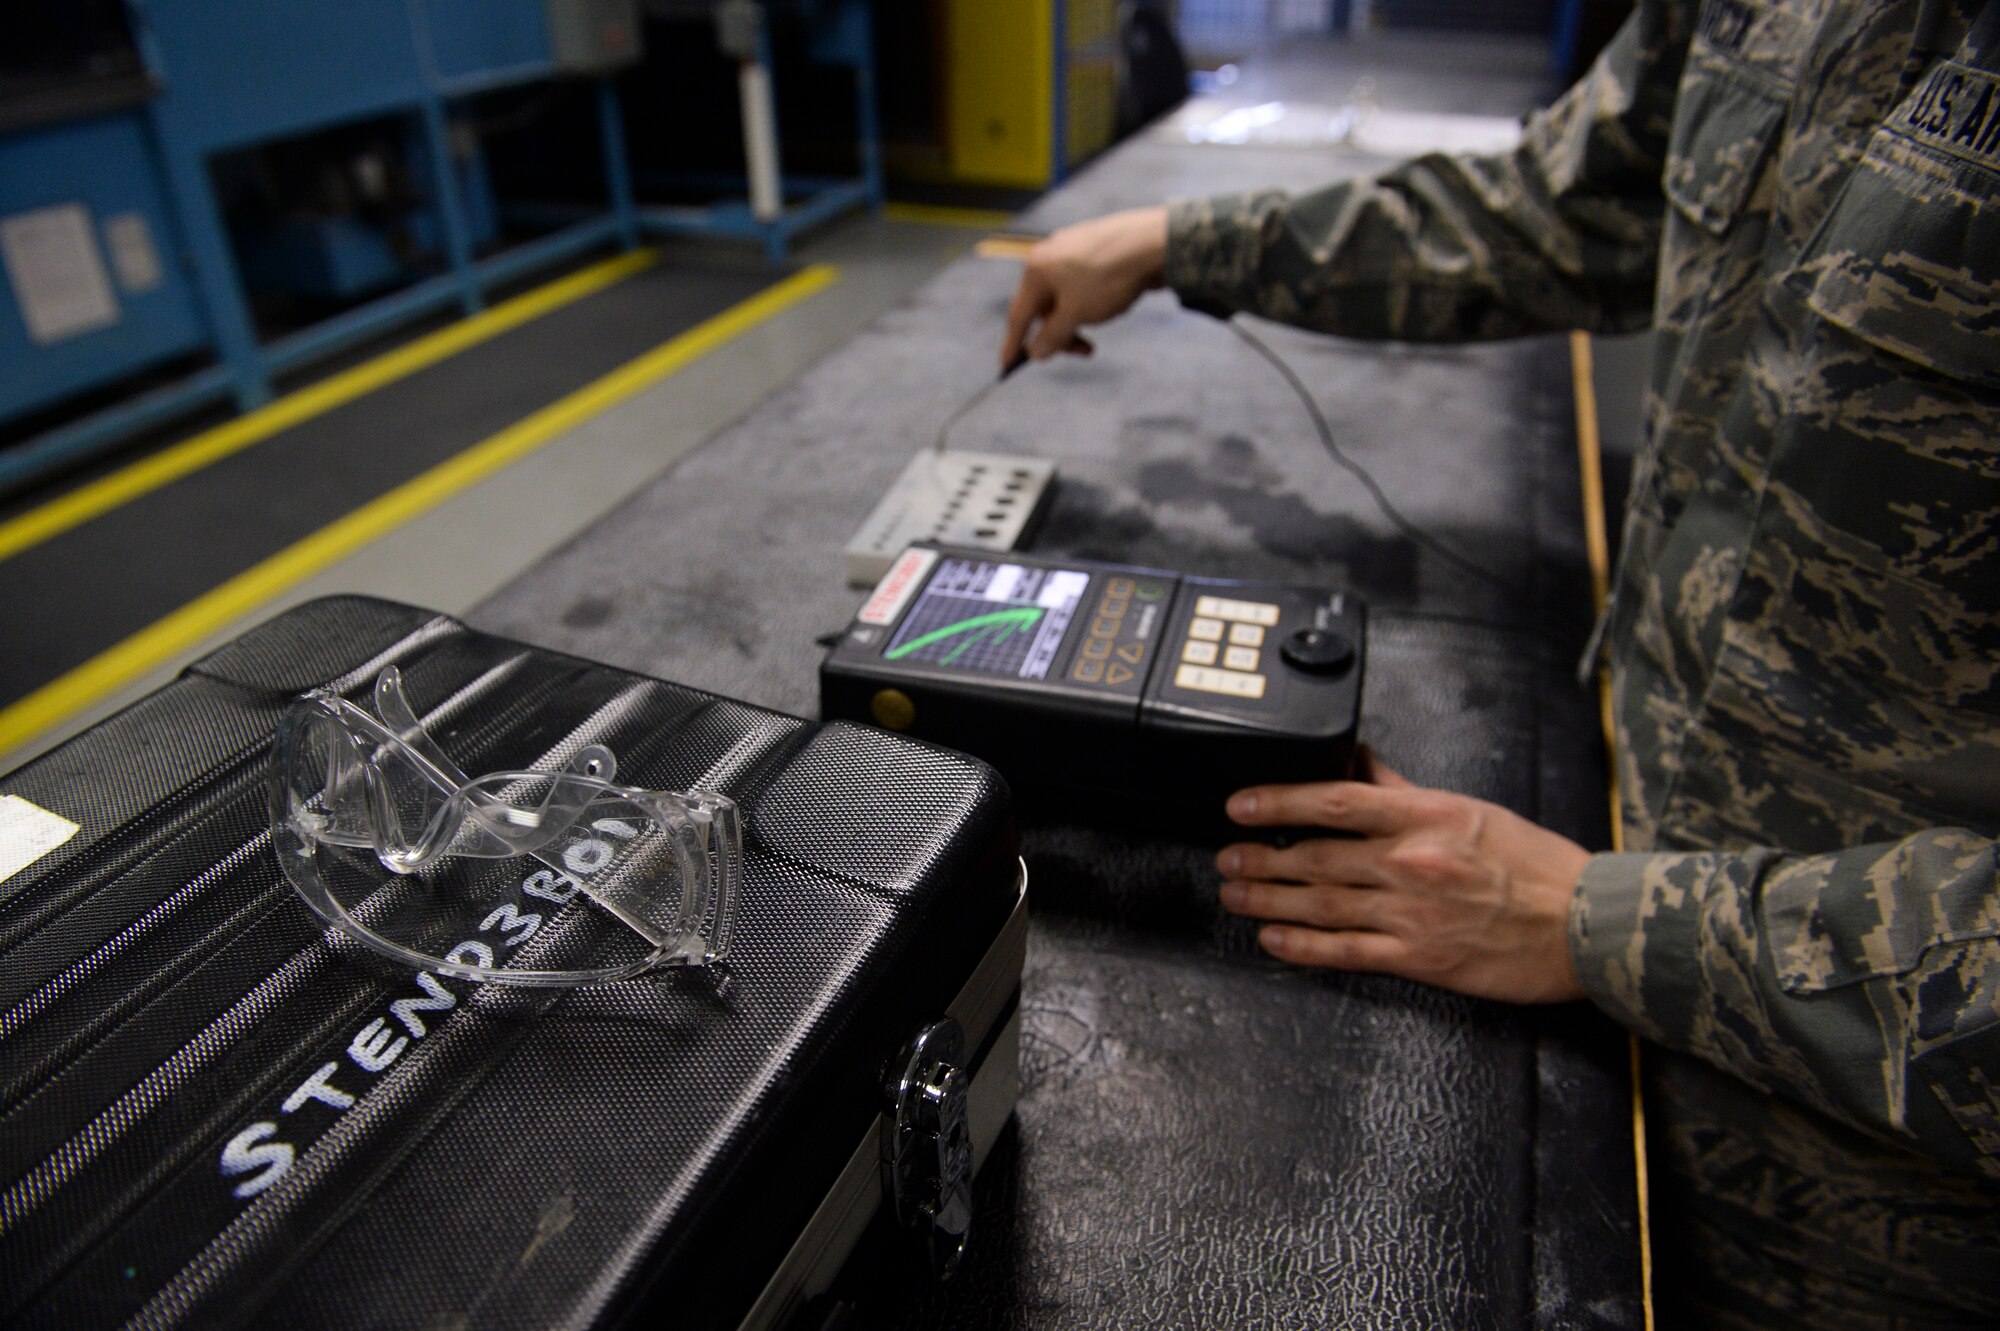 U.S. Air Force Airman 1st Class Christopher Garcia, a 52nd Equipment Maintenance Squadron non- destructive inspection apprentice from Tucson, Ariz., calibrates an Eddie current unit March 7, 2014, at Spangdahlem Air Base, Germany. The Eddie current unit detects small cracks on the aircraft that are too small for the human eye to see. (U.S. Air Force photo by Senior Airman Rusty Frank/Released)